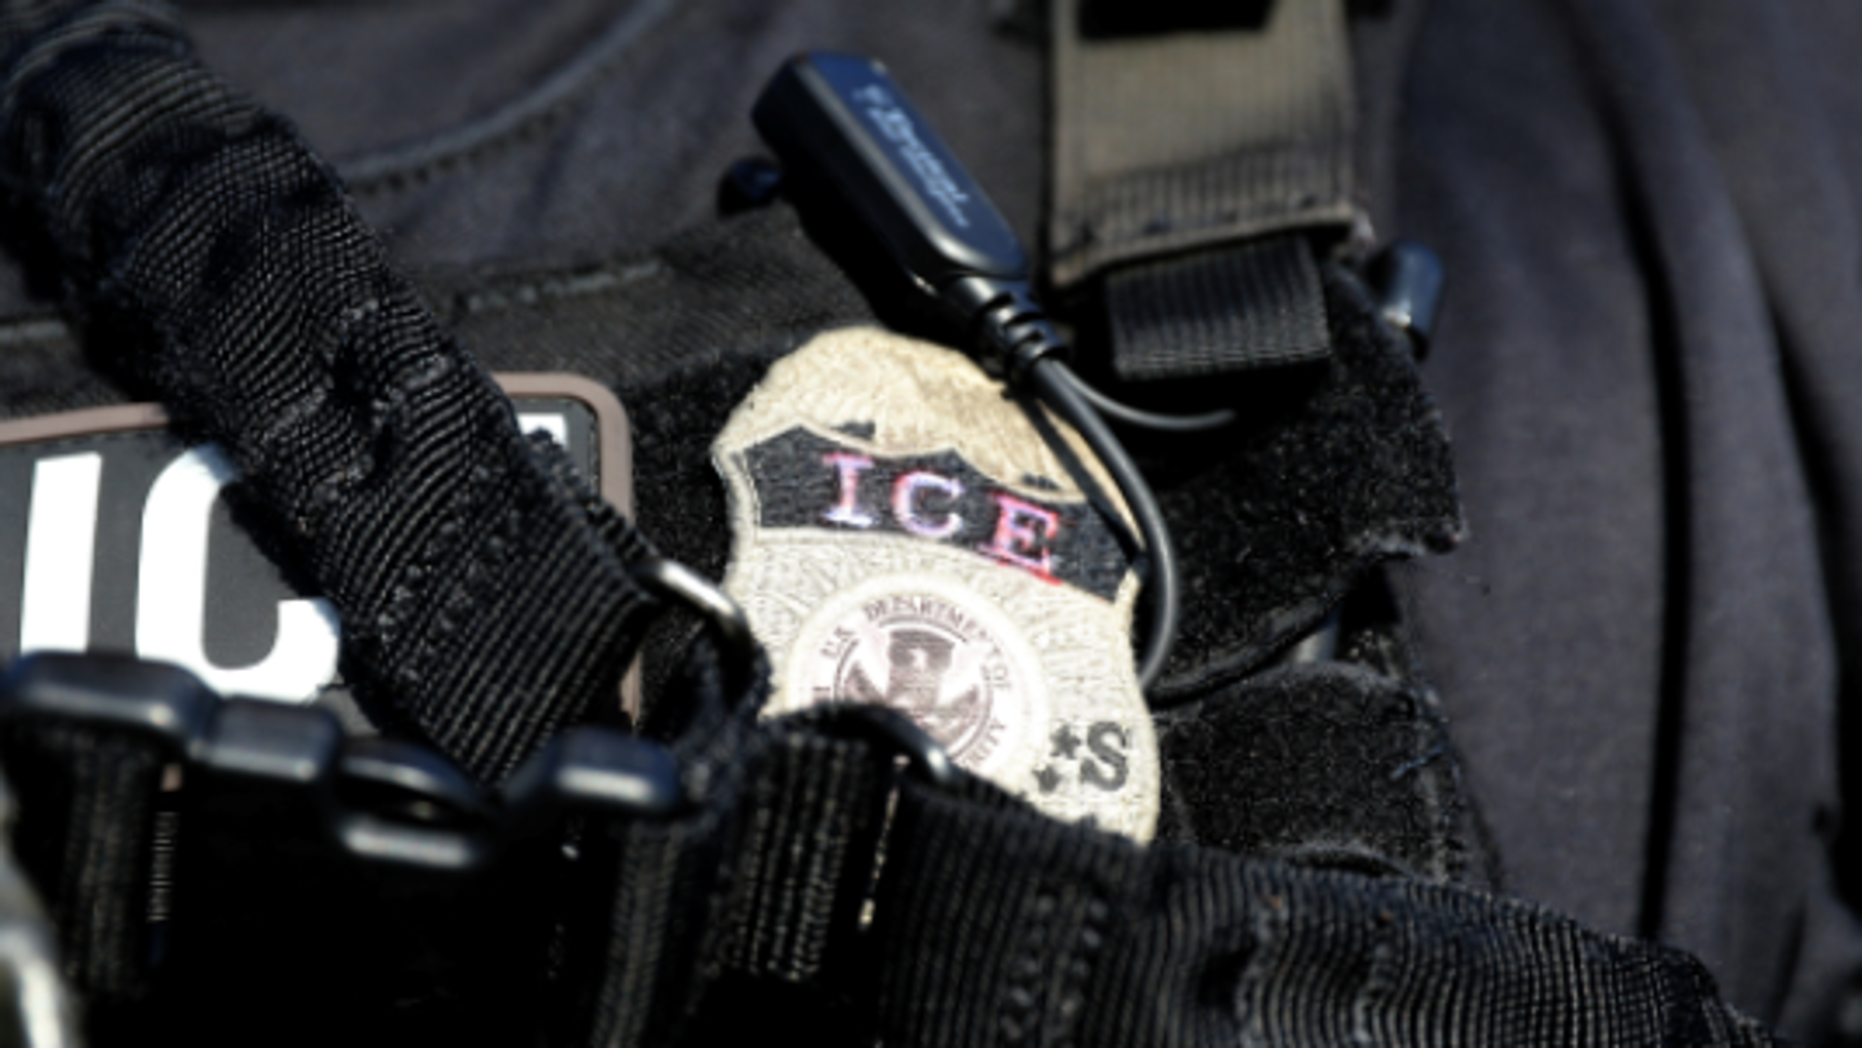 Black Female Ice Agent Accuses Police Department Of Racial Profiling After Being Pulled Over 